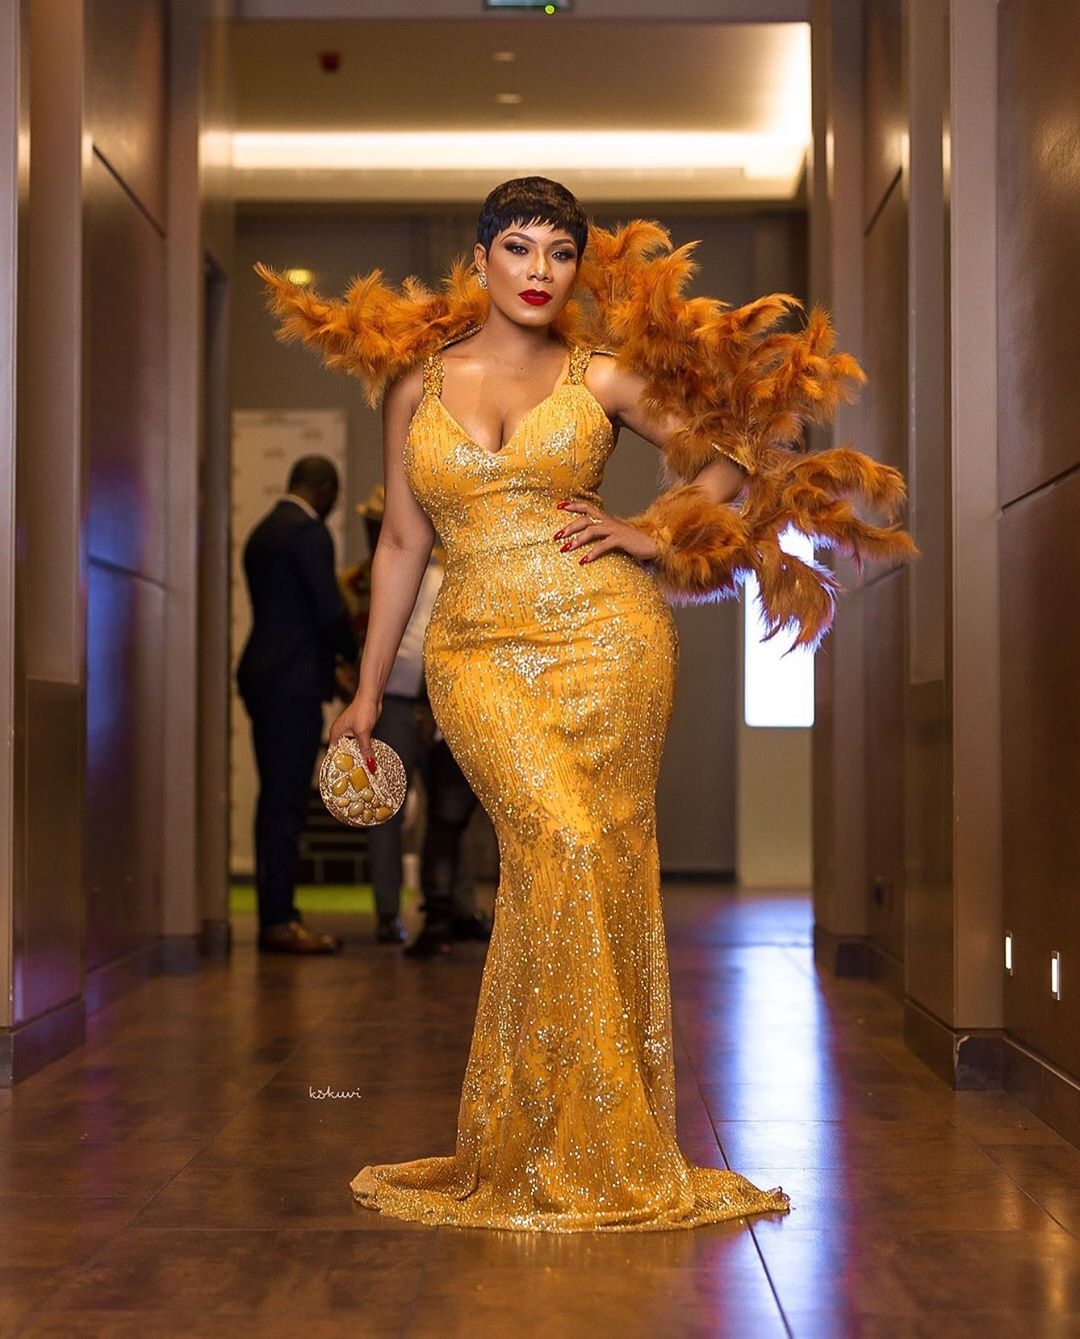 Ghana Is Stepping Up! Here Are The Top 15 Best Dressed Celebrities From The Golden Movie Awards Night